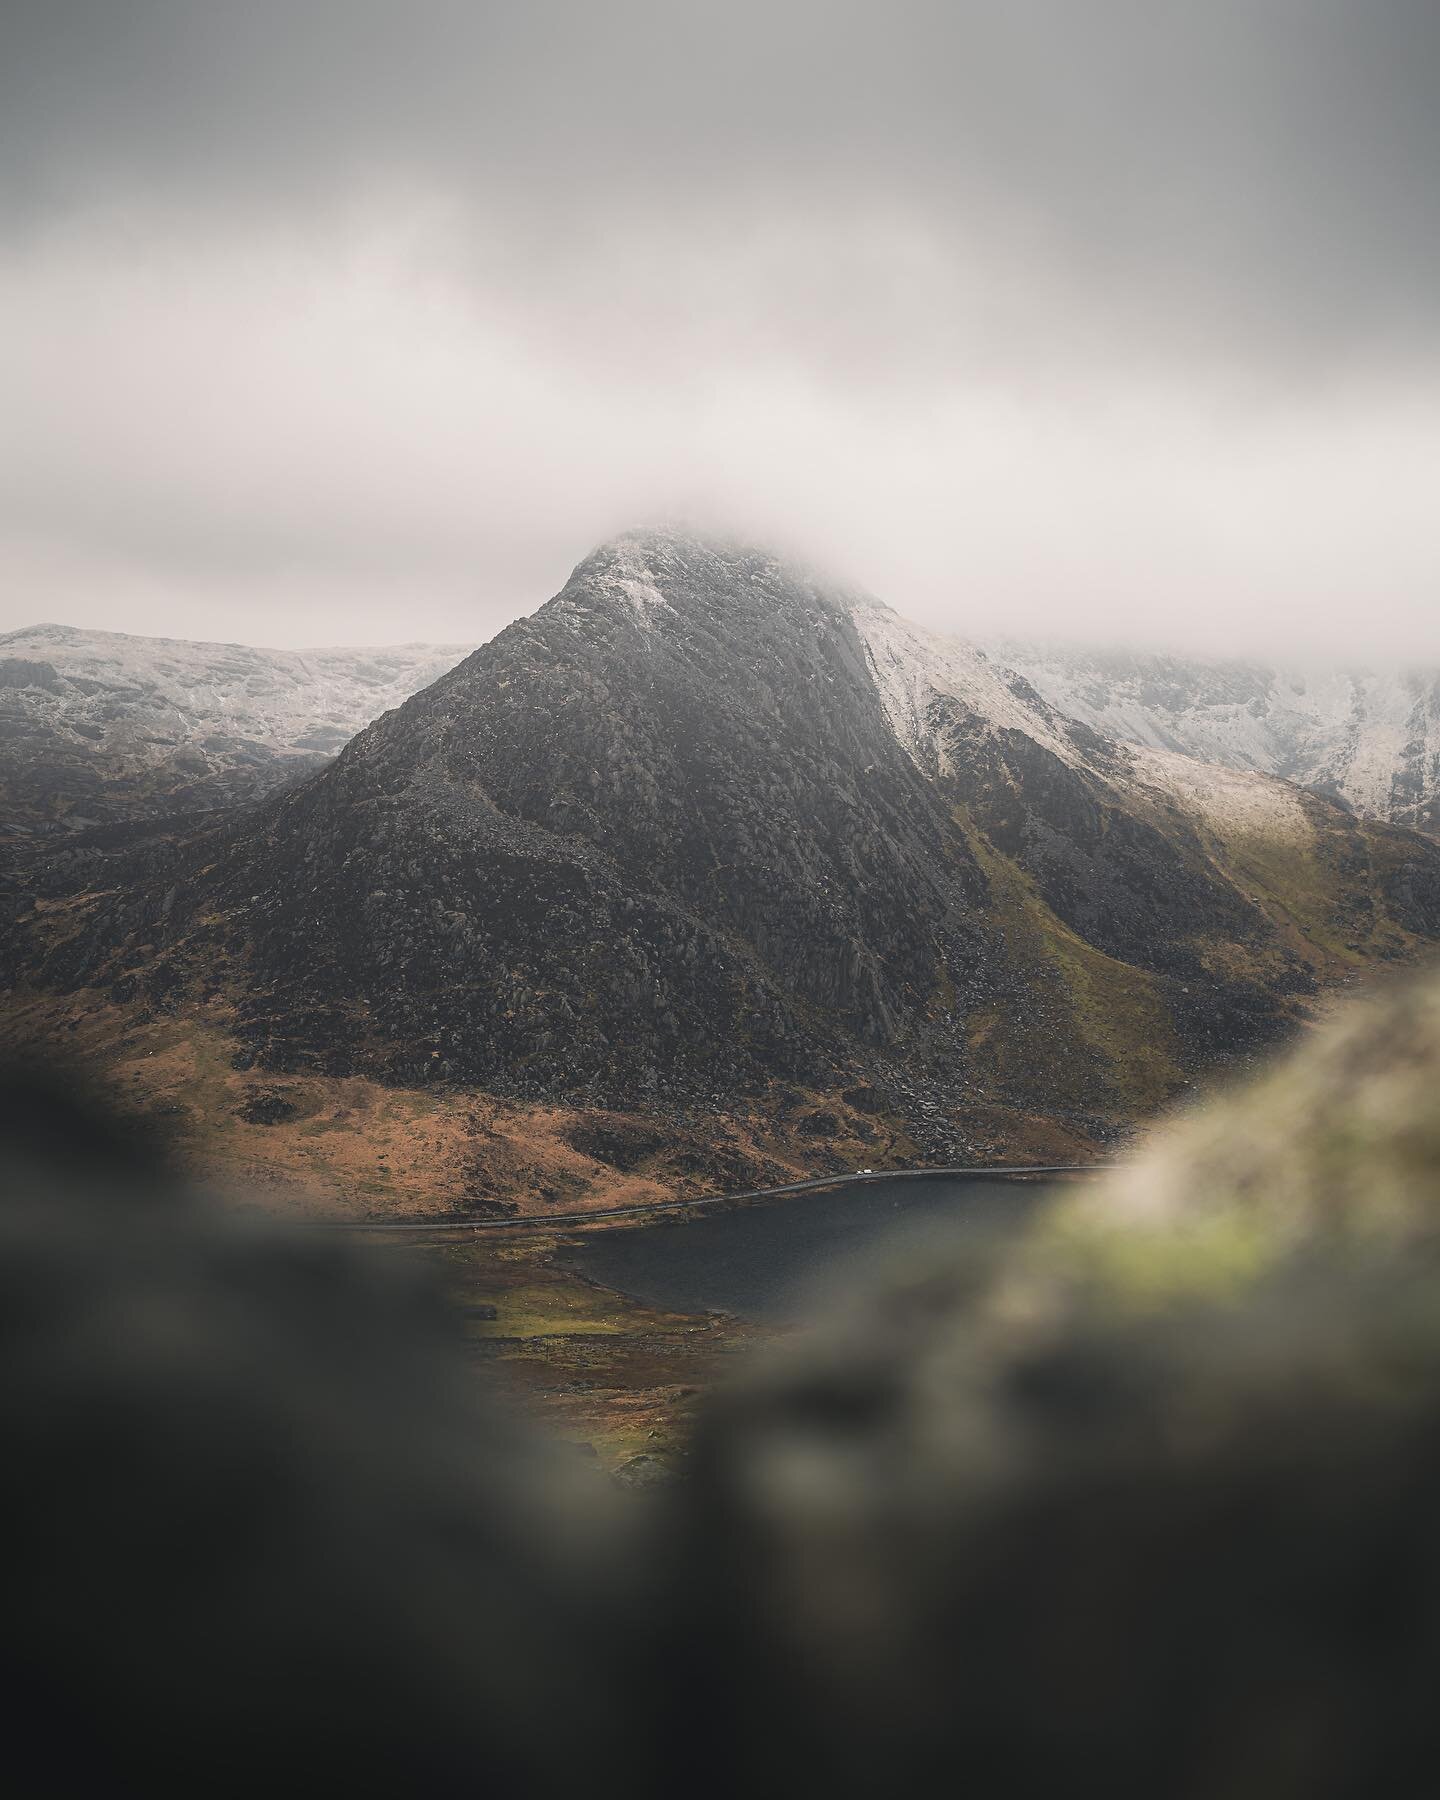 Amazing weekend up north Wales with @withgar and @craigdavidmack. The place never disappoints. Especially the Ogwen Valley!

I think I&rsquo;ve decided that overcast low cloud is my favourite conditions for photography. I reserve the right to change 